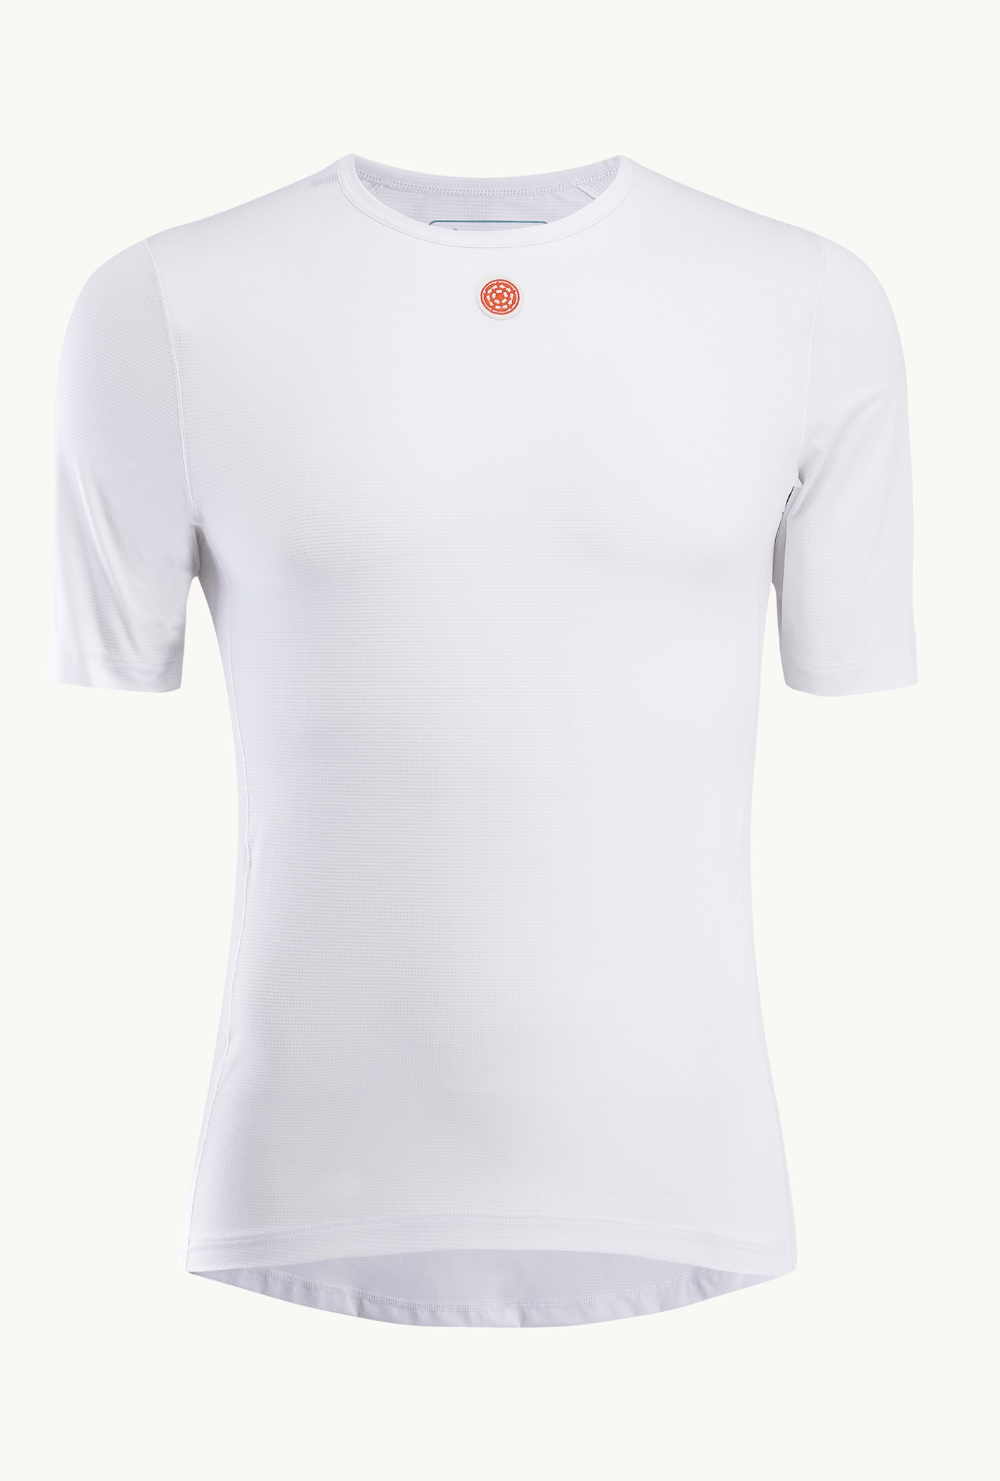 Pearson 1860  Touch Base - Short Sleeve Base Layer White  Small / White